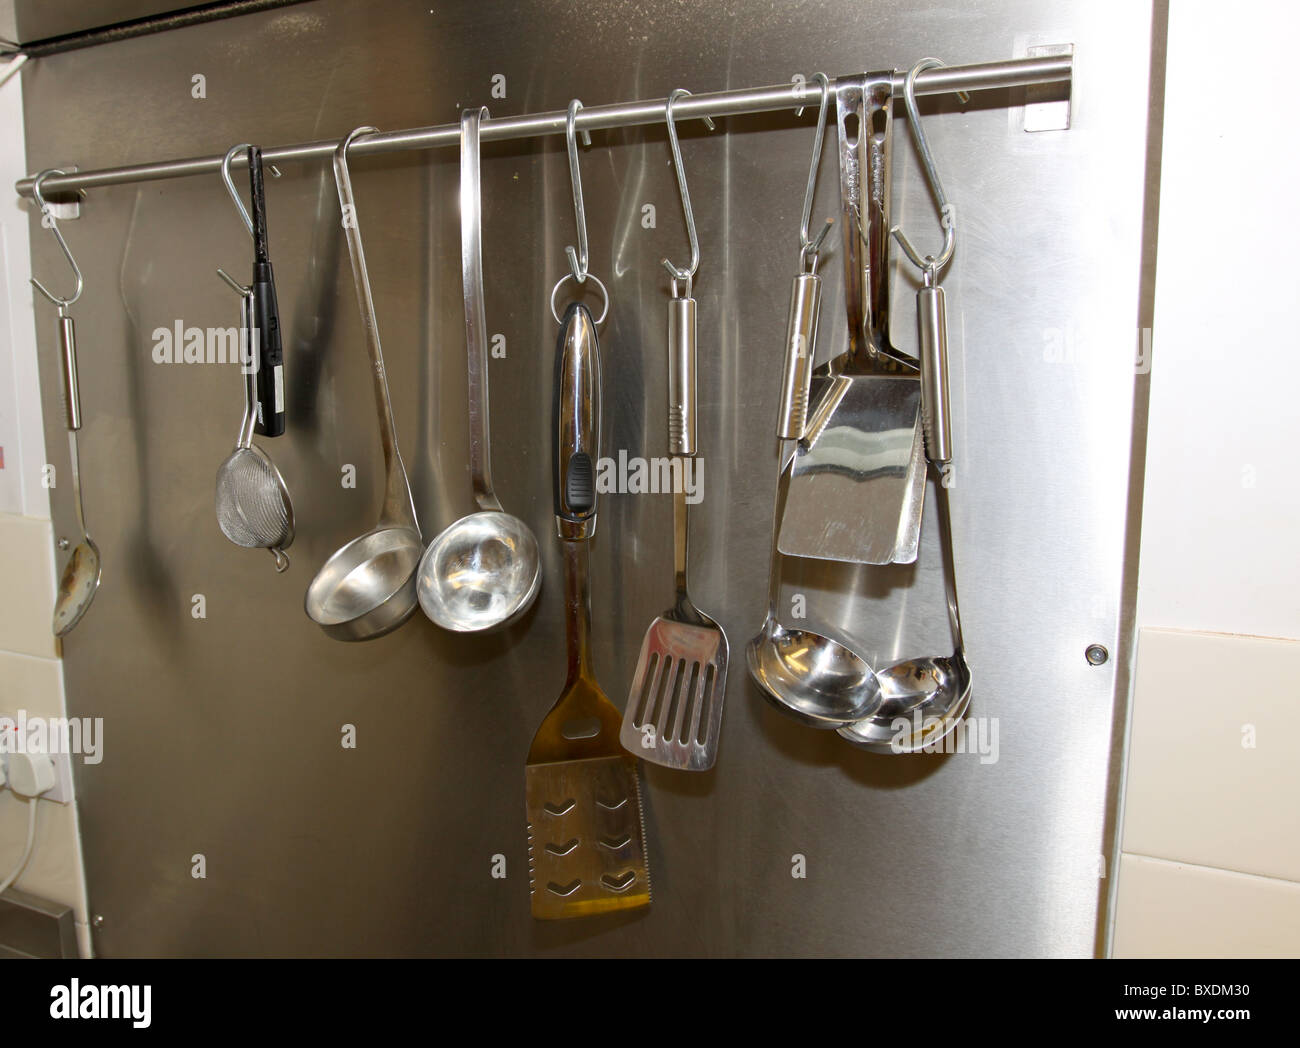 Cooking utensils hanging on rail in commercial kitchen Stock Photo